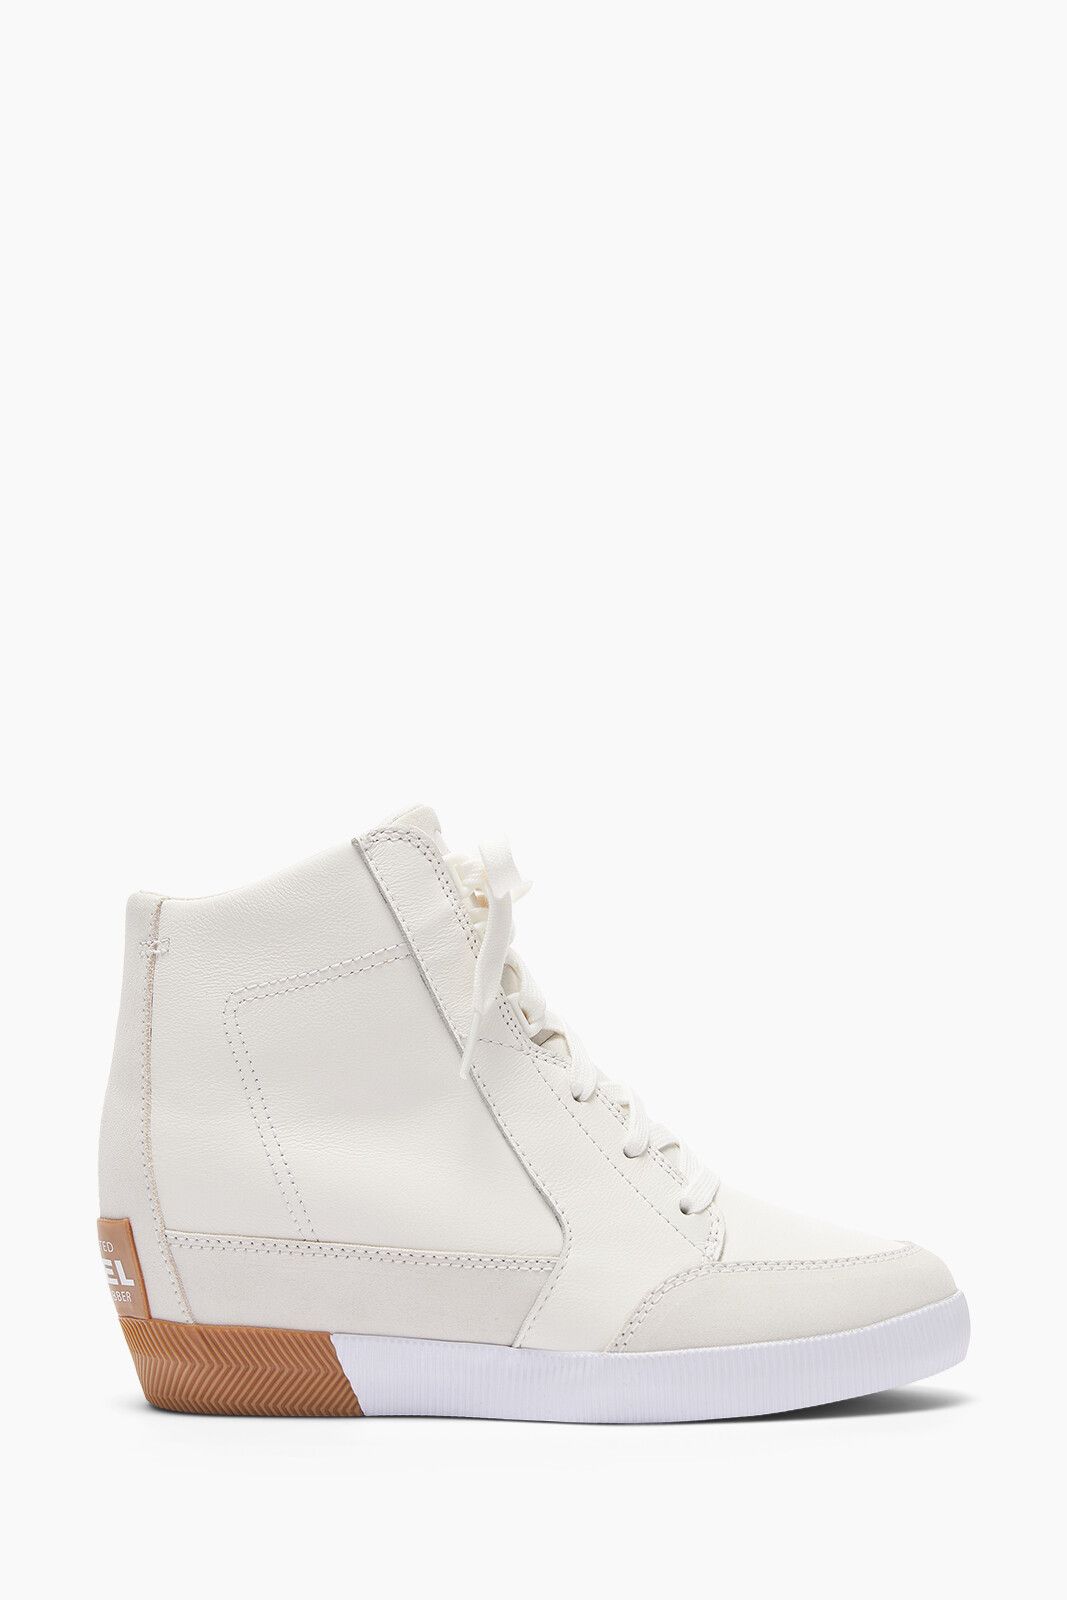 SOREL Out N About Wedge Sneaker | EVEREVE | Evereve